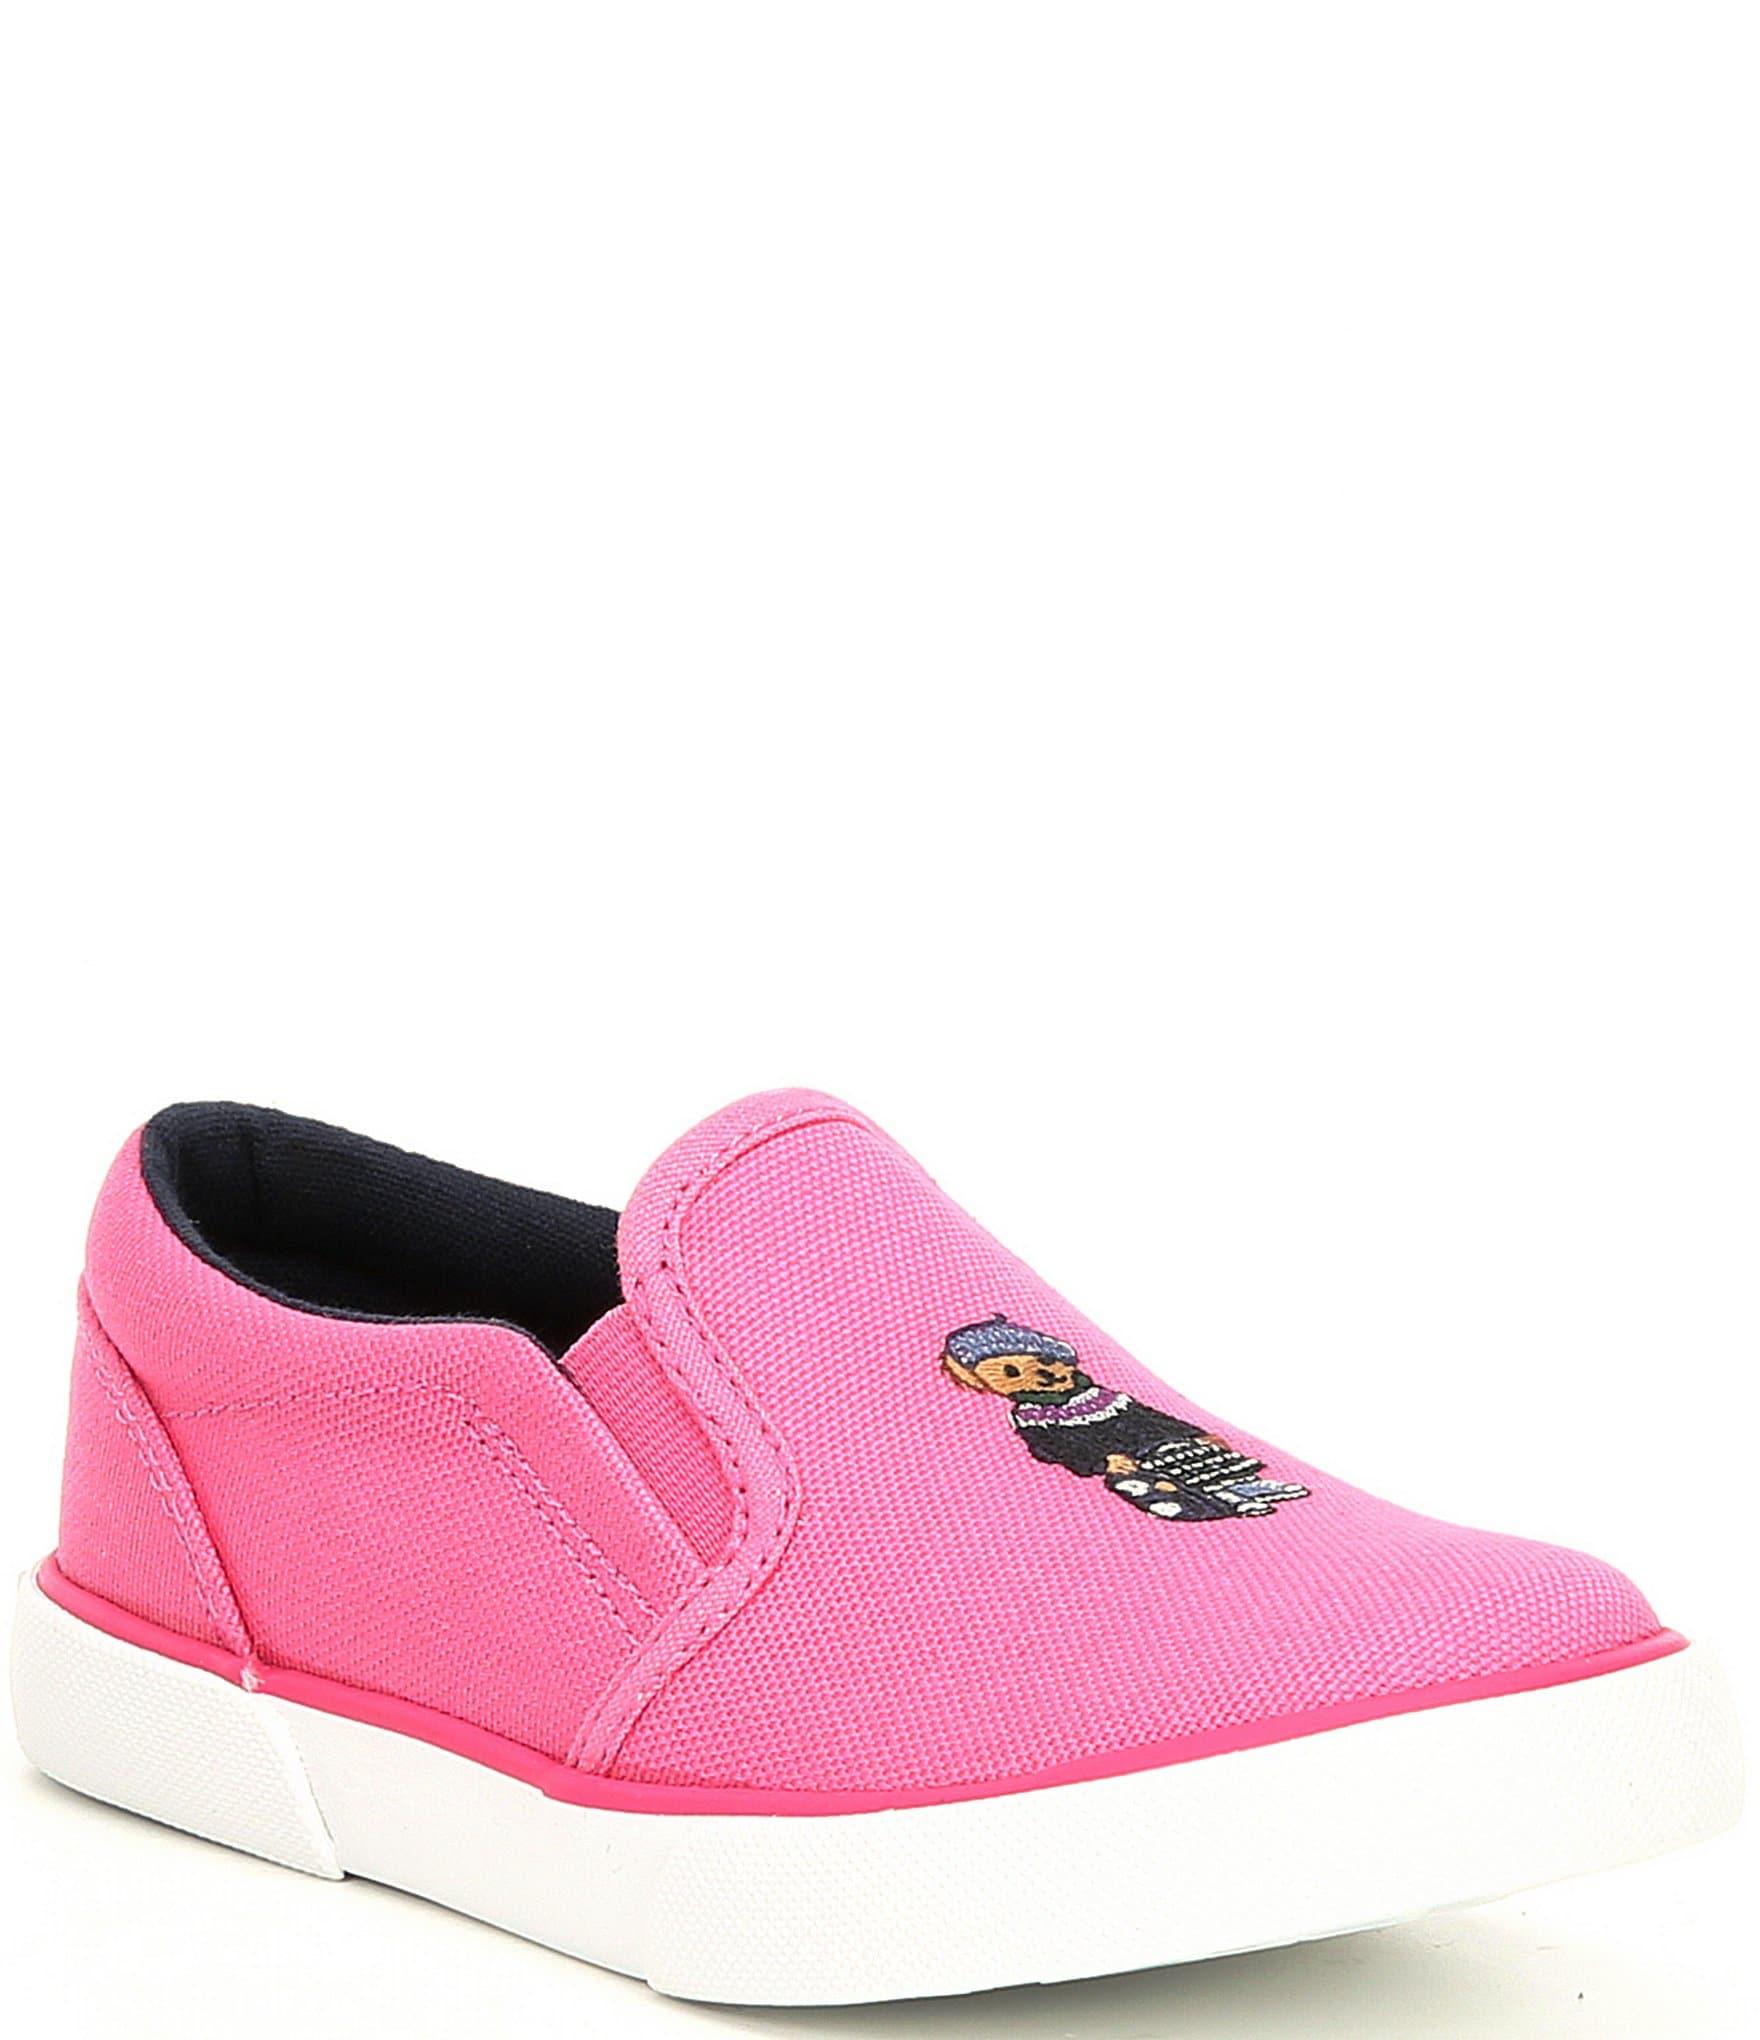 polo shoes for baby girl